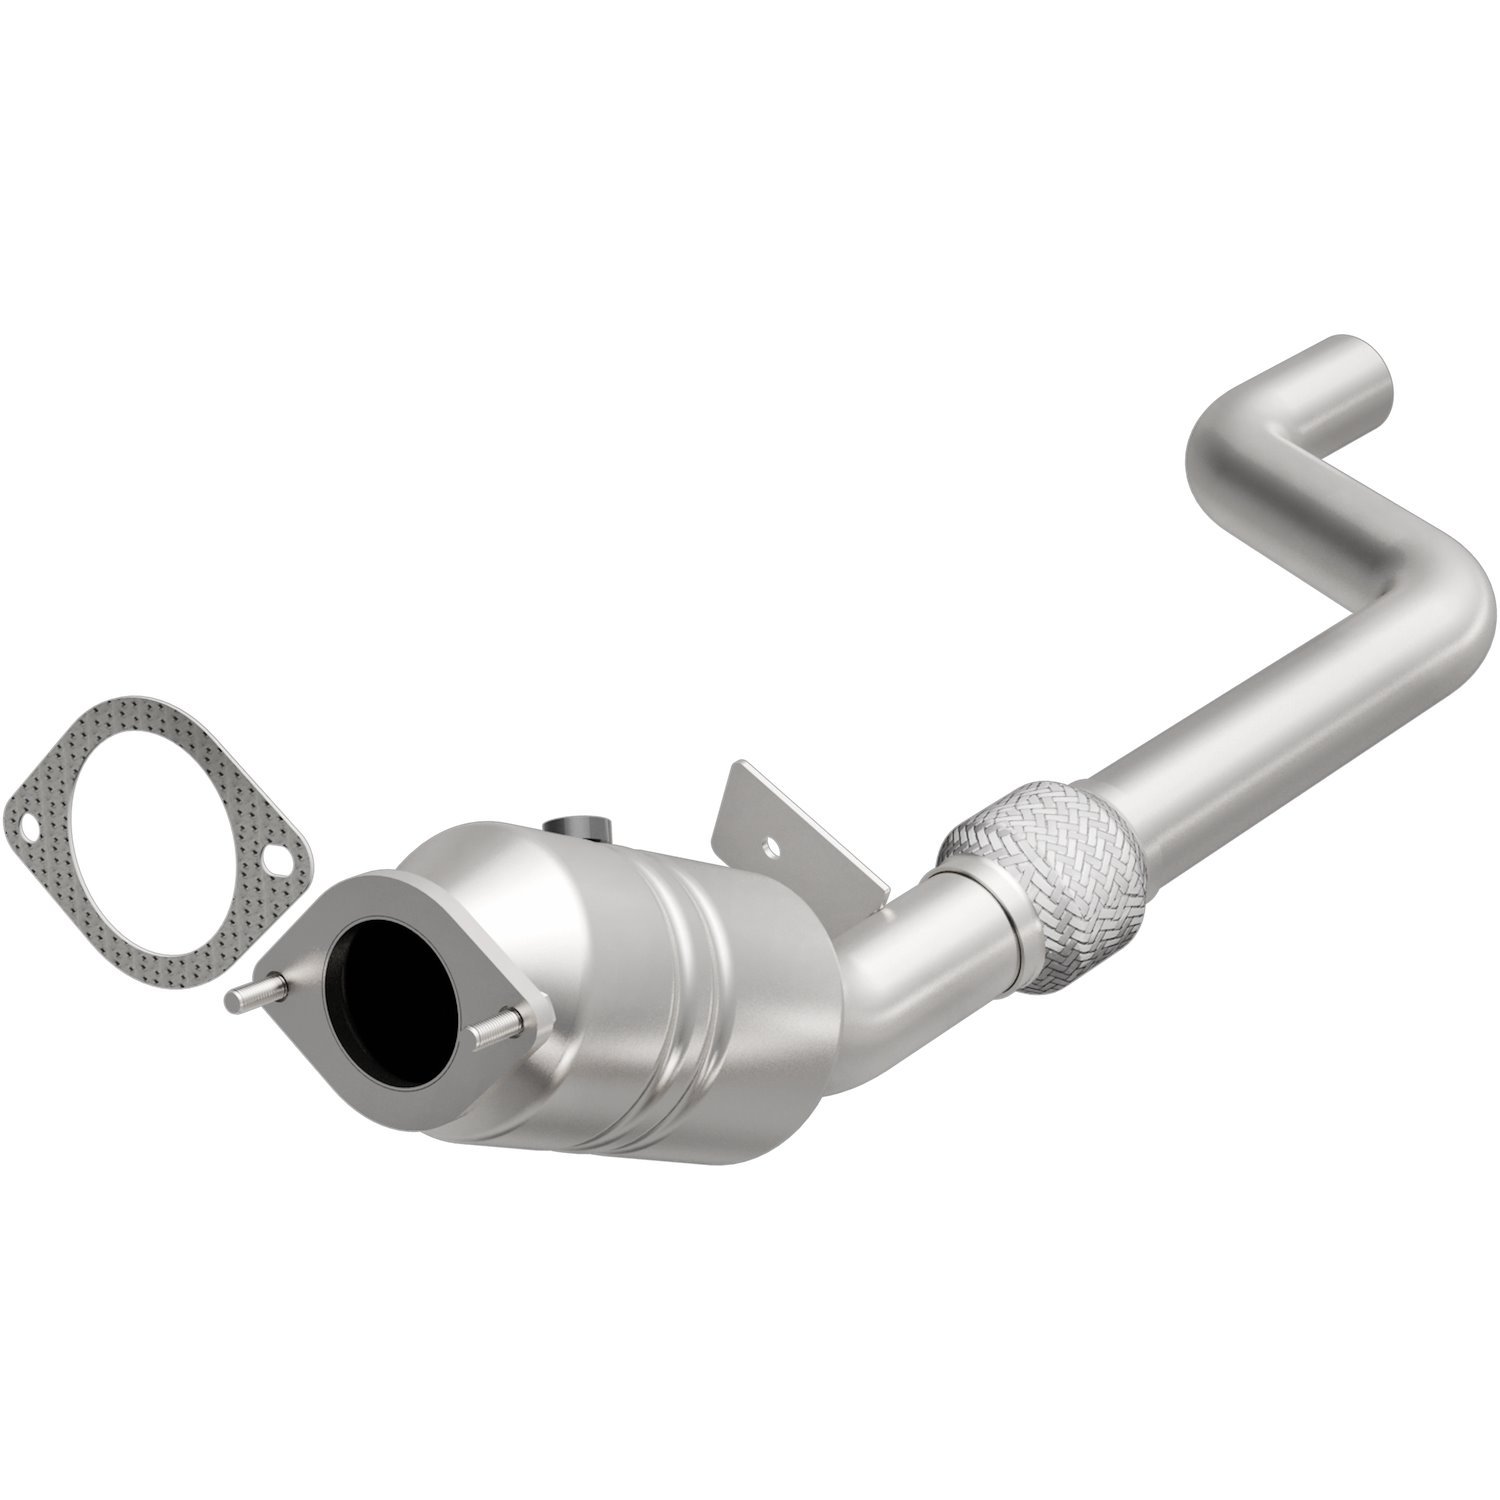 2015-2020 Ford Mustang OEM Grade Federal / EPA Compliant Direct-Fit Catalytic Converter